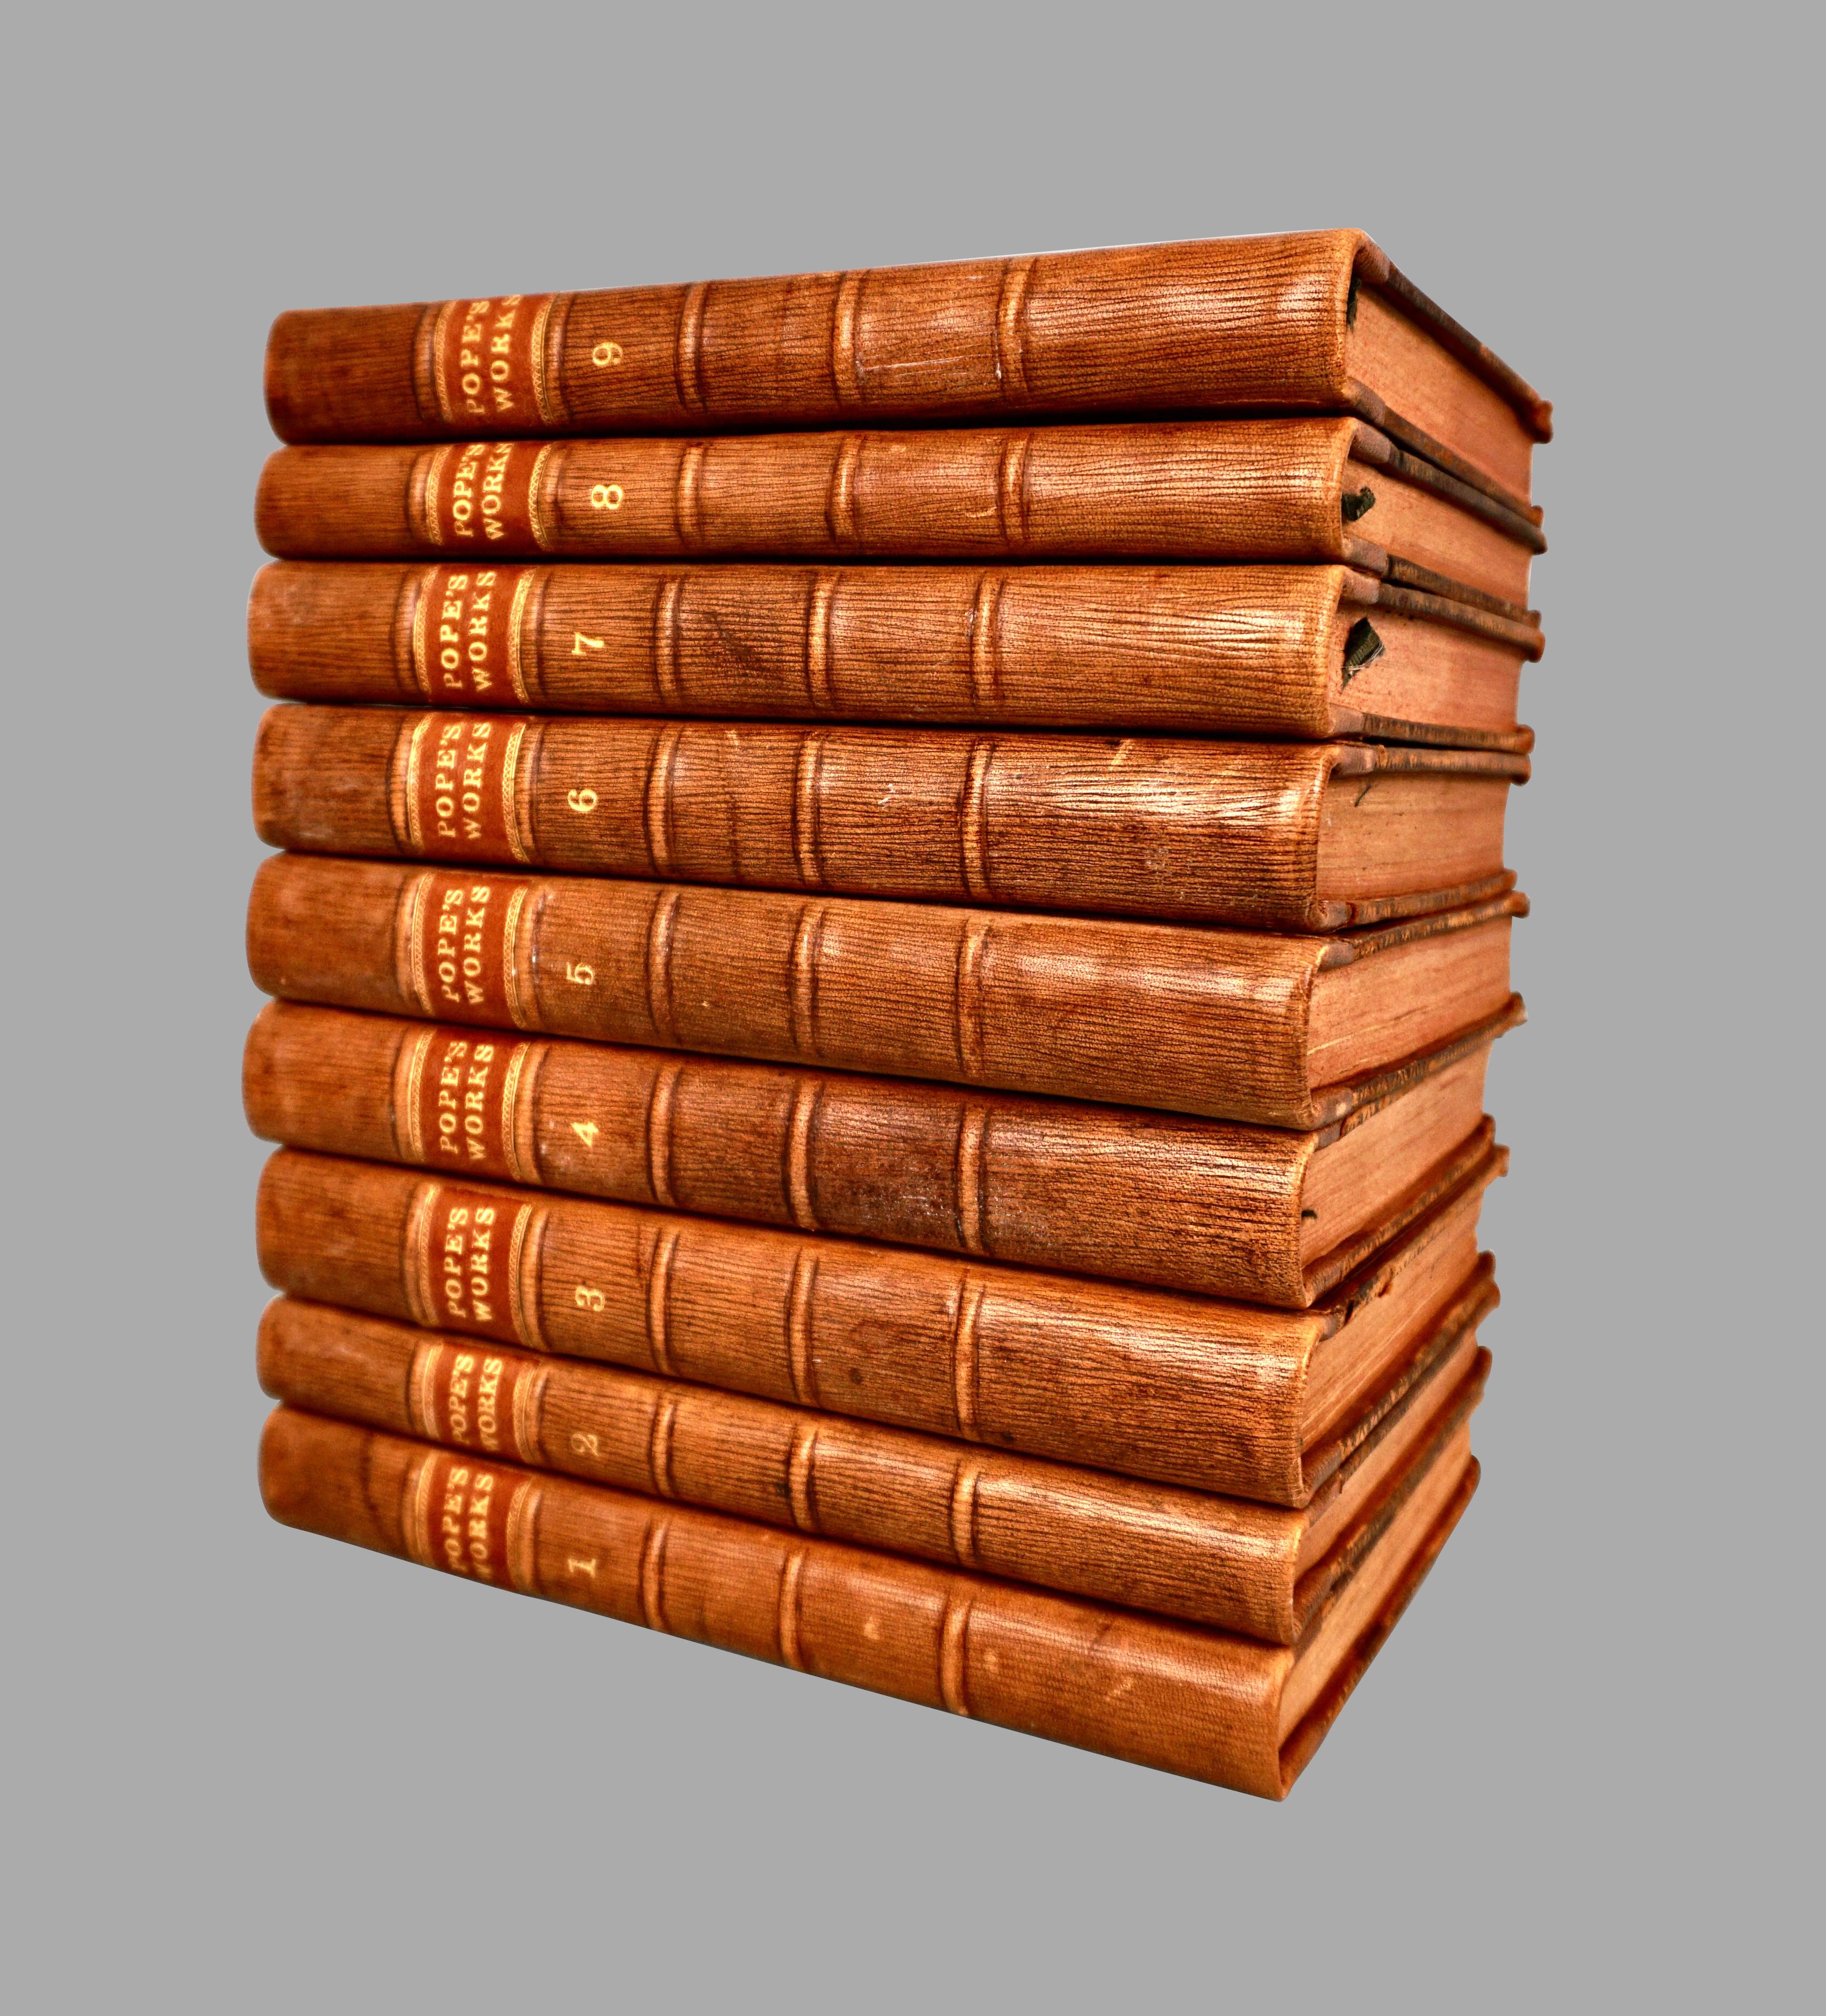 Works of Alexander Pope Leatherbound in 9 Volumes Published 1757 For Sale 1